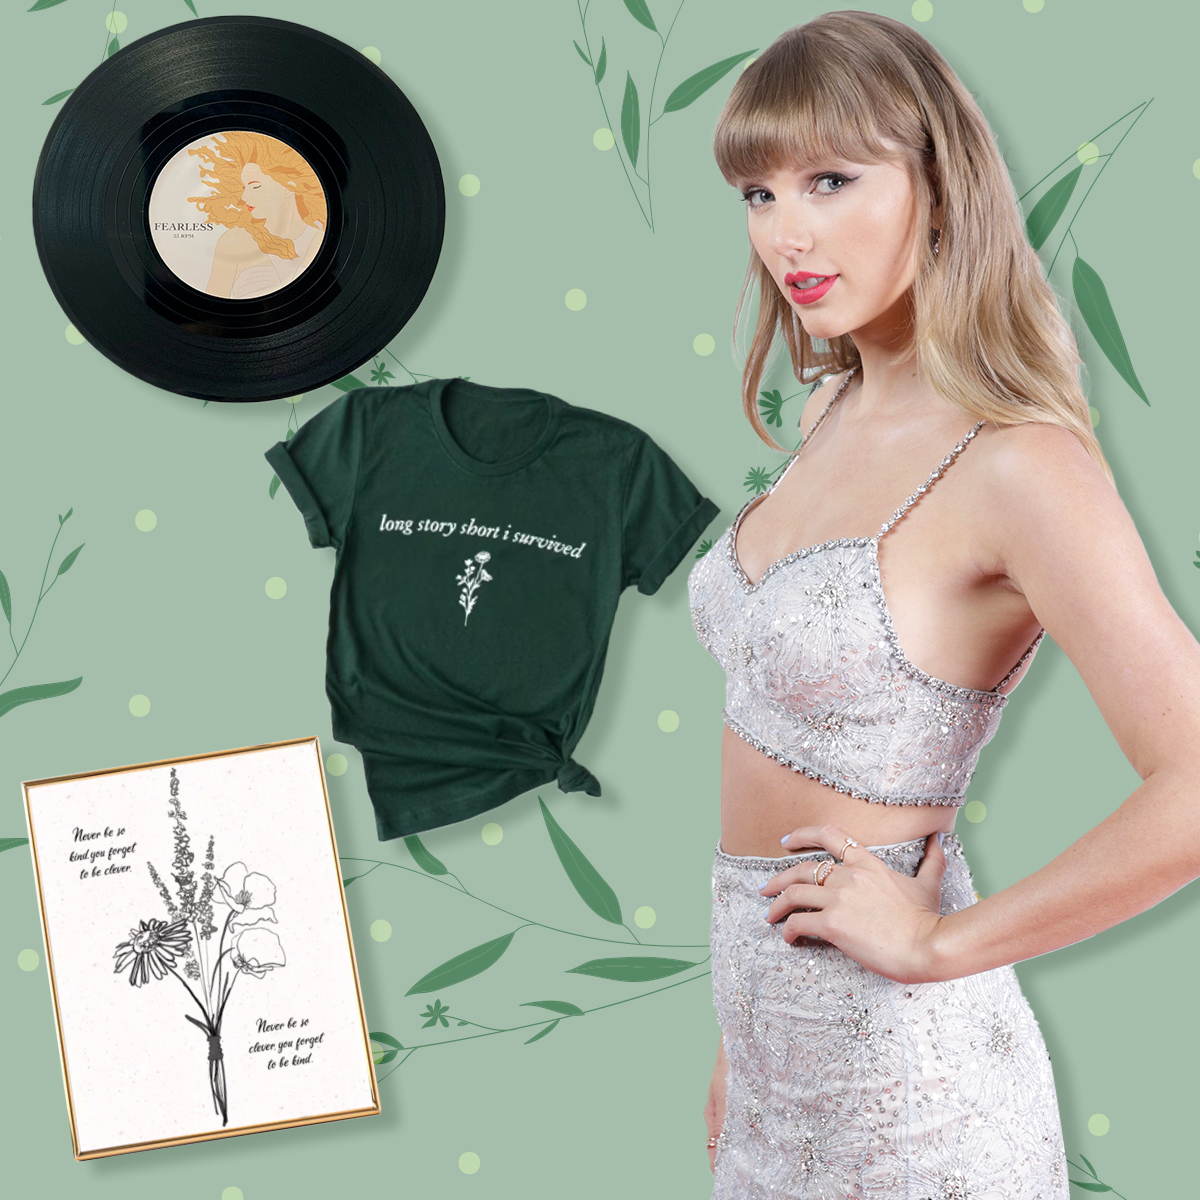 What are some things I could put into a Taylor themed gift box